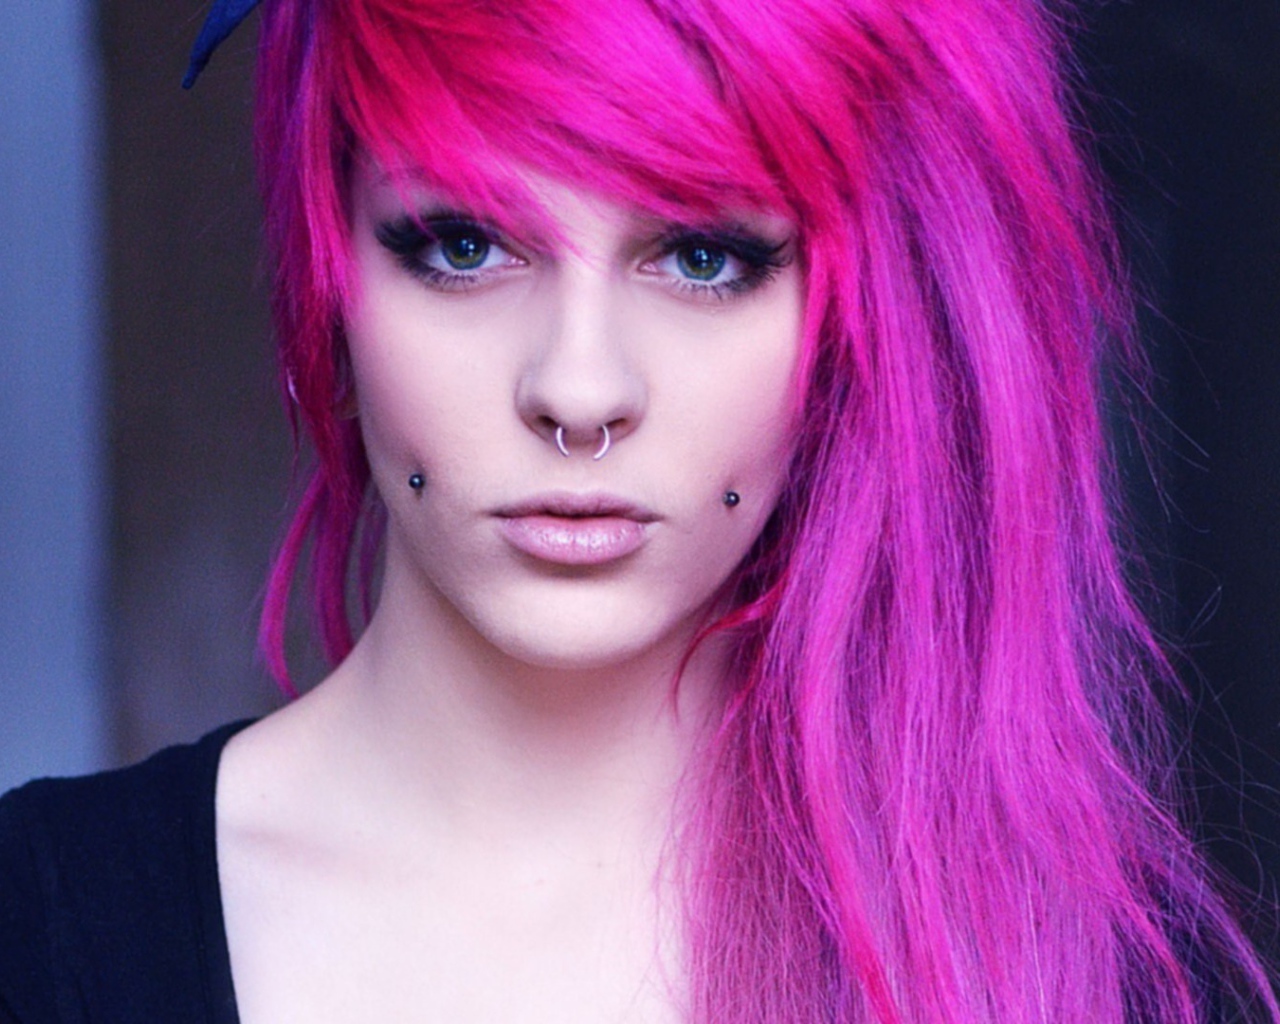 A girl with pink hair and piercings in her cheeks